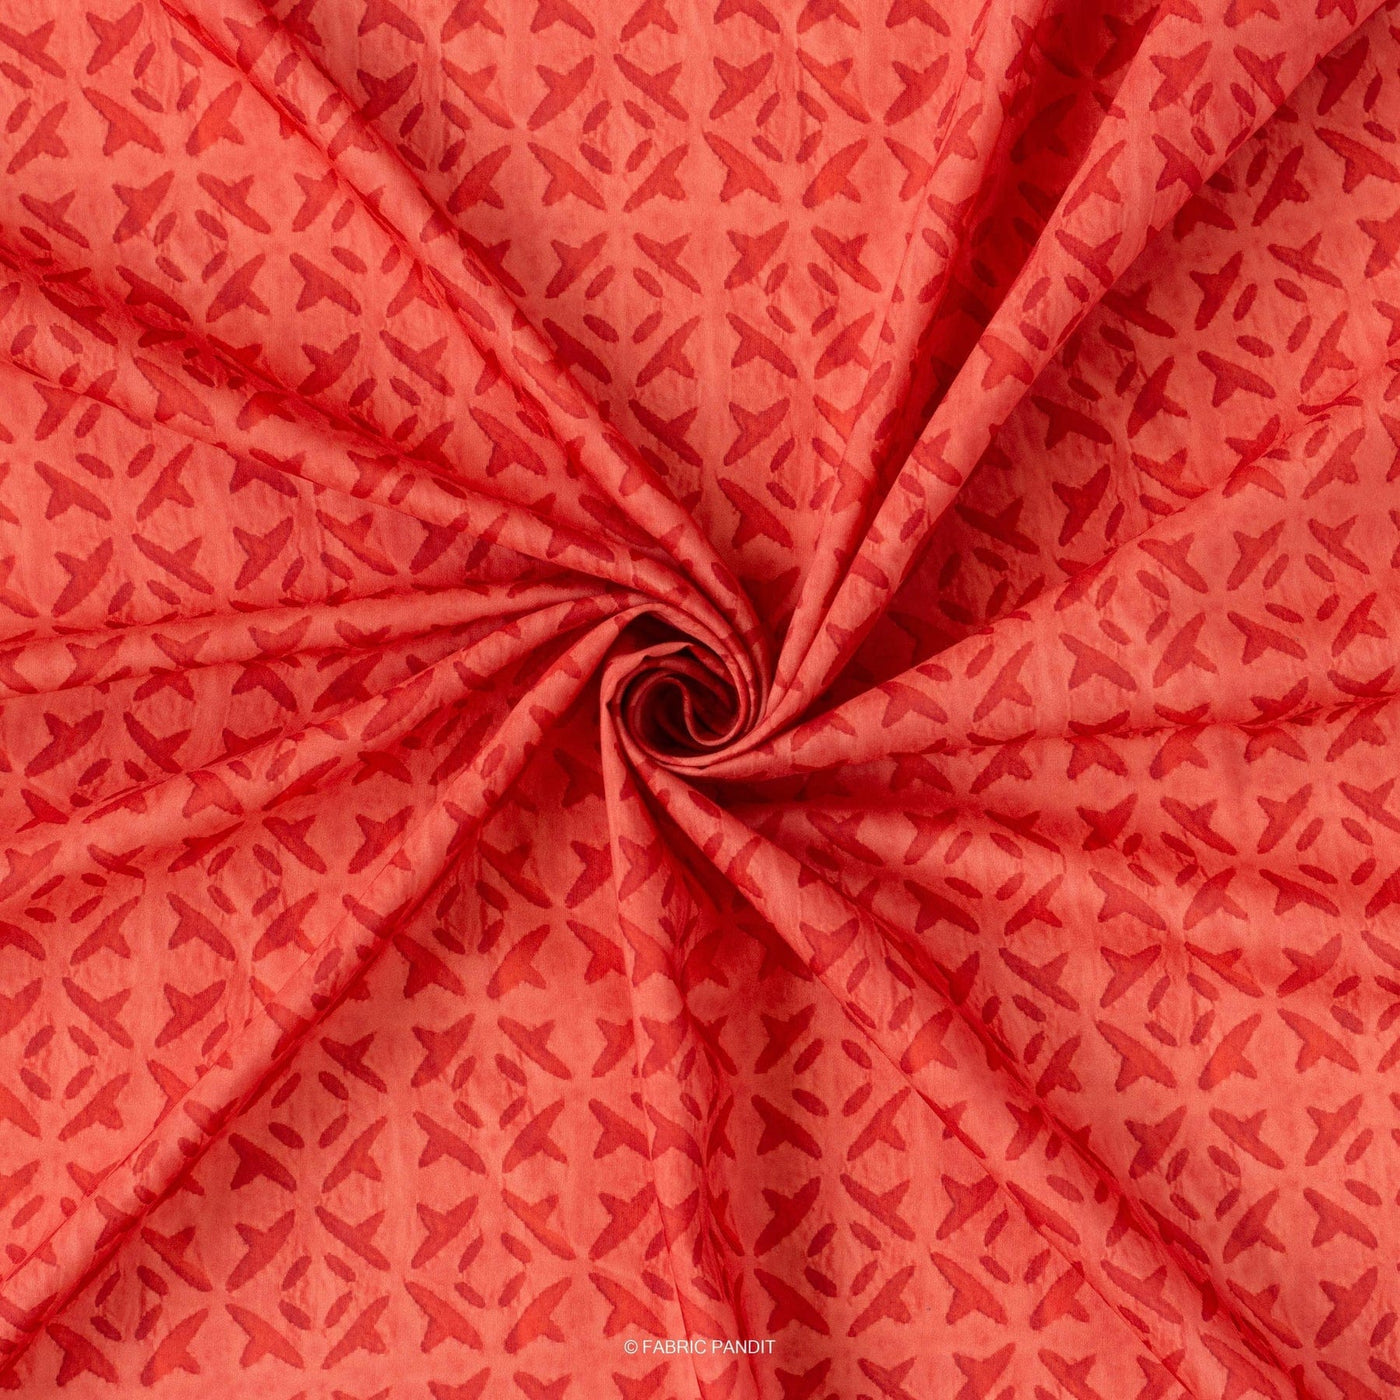 Fabric Pandit Fabric Salmon Red Criss-Cross Applique Pattern Digital Printed Muslin Fabric (Width 44 Inches)